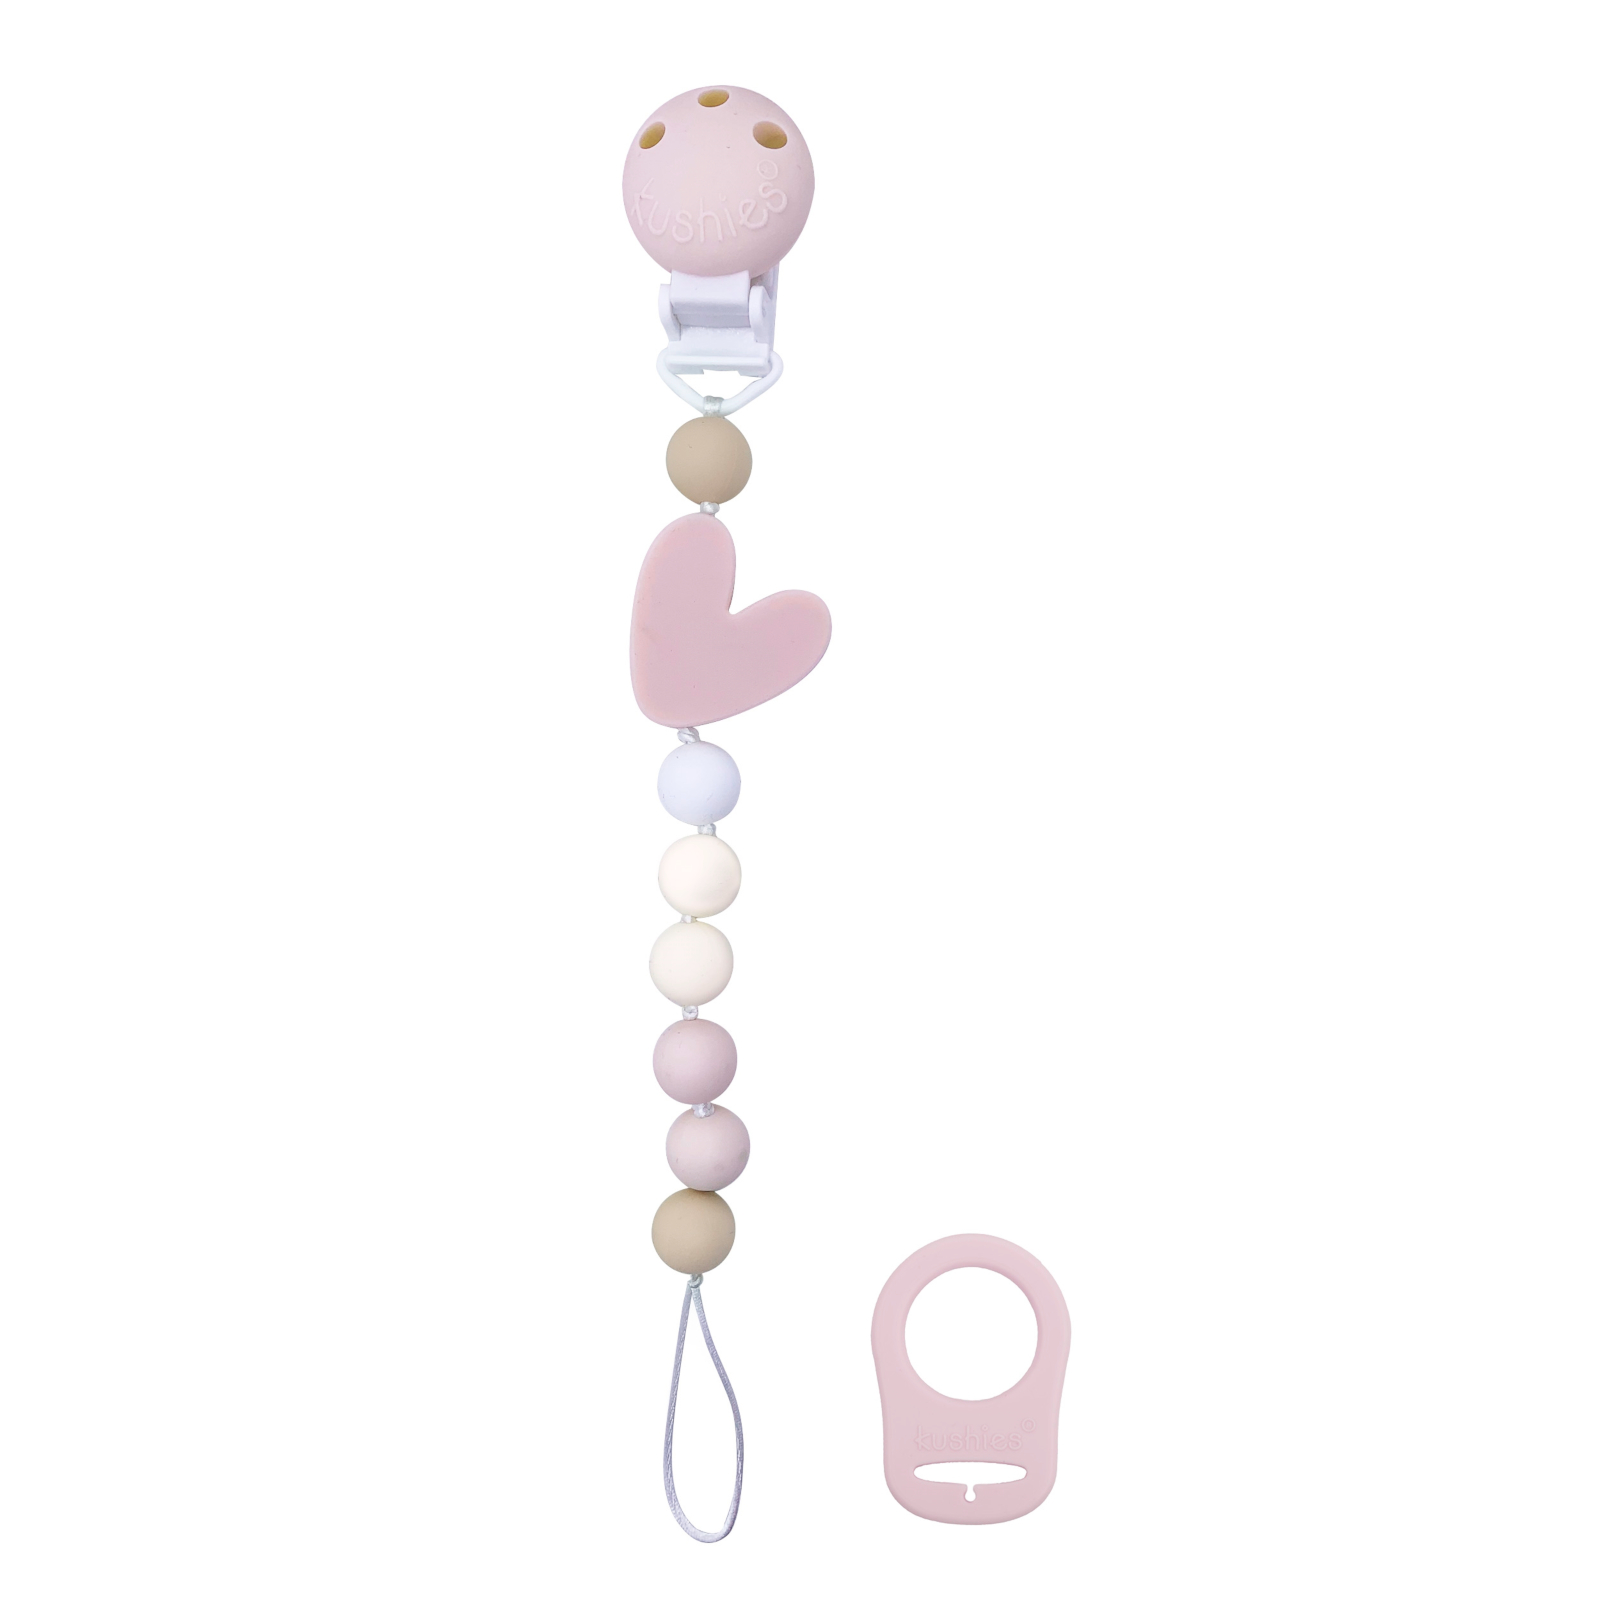 KUSHIES Attache-sucette en silicone SiliBeads, cœur rose